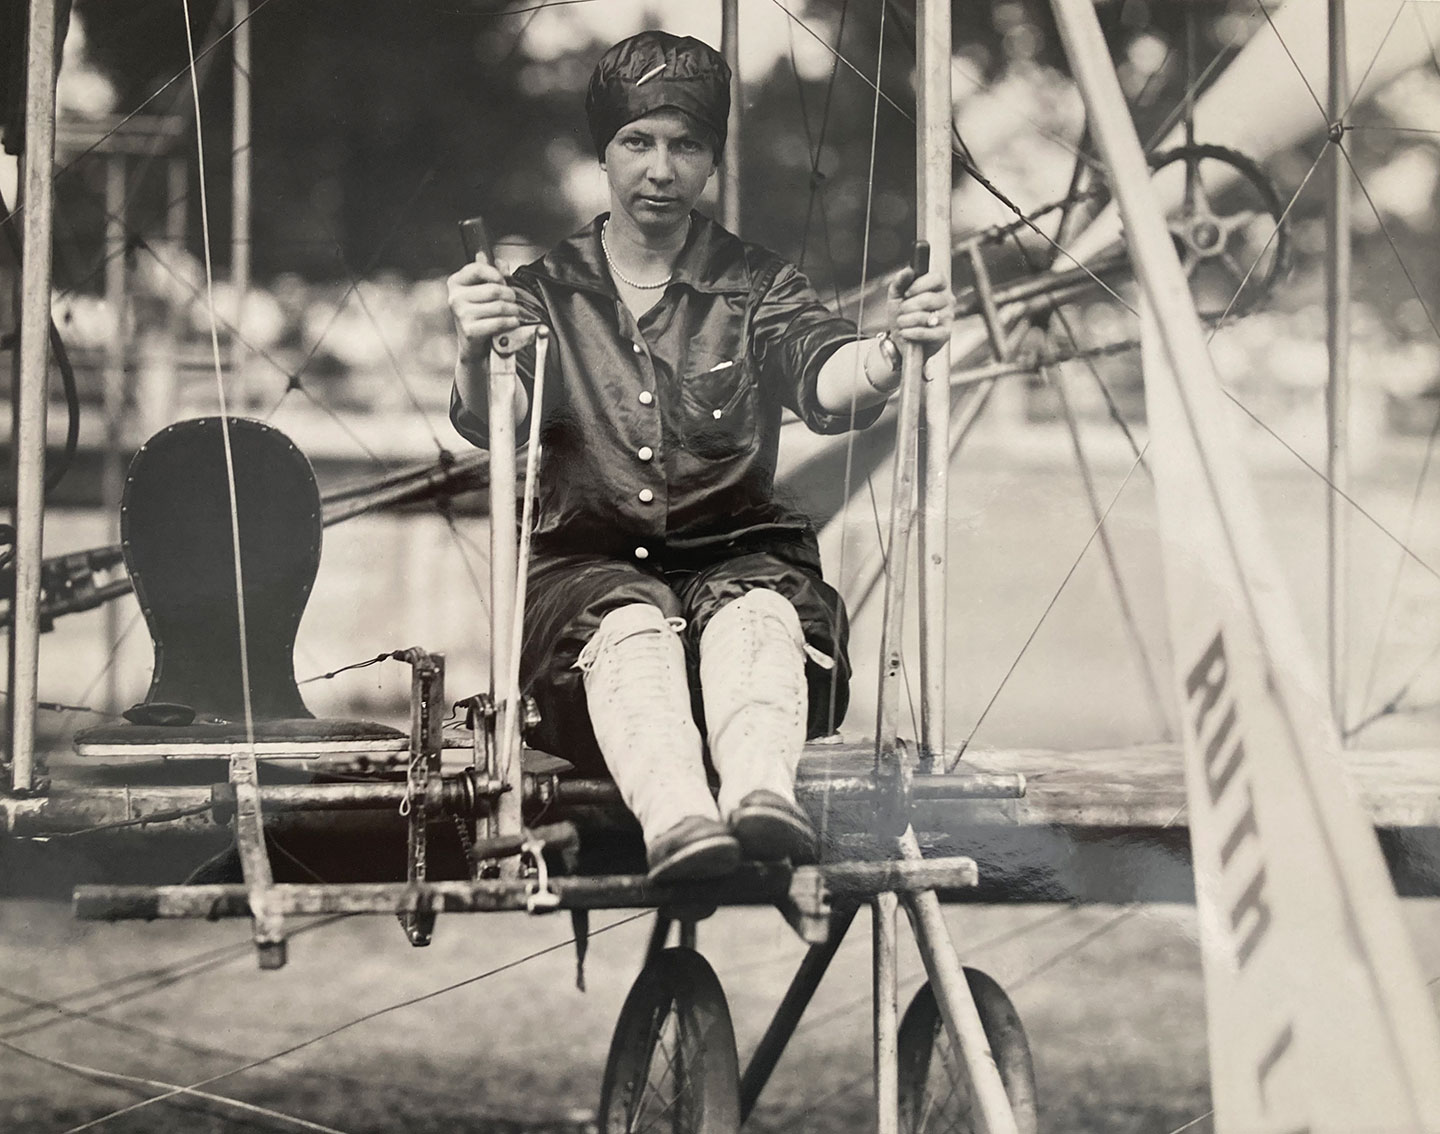 Figure 2. William Preston Mayfield (American, 1896–1974), Ruth Law in Her Wright Model B Biplane, 1915, gelatin silver print. Collection of Randle and Cristina Egbert